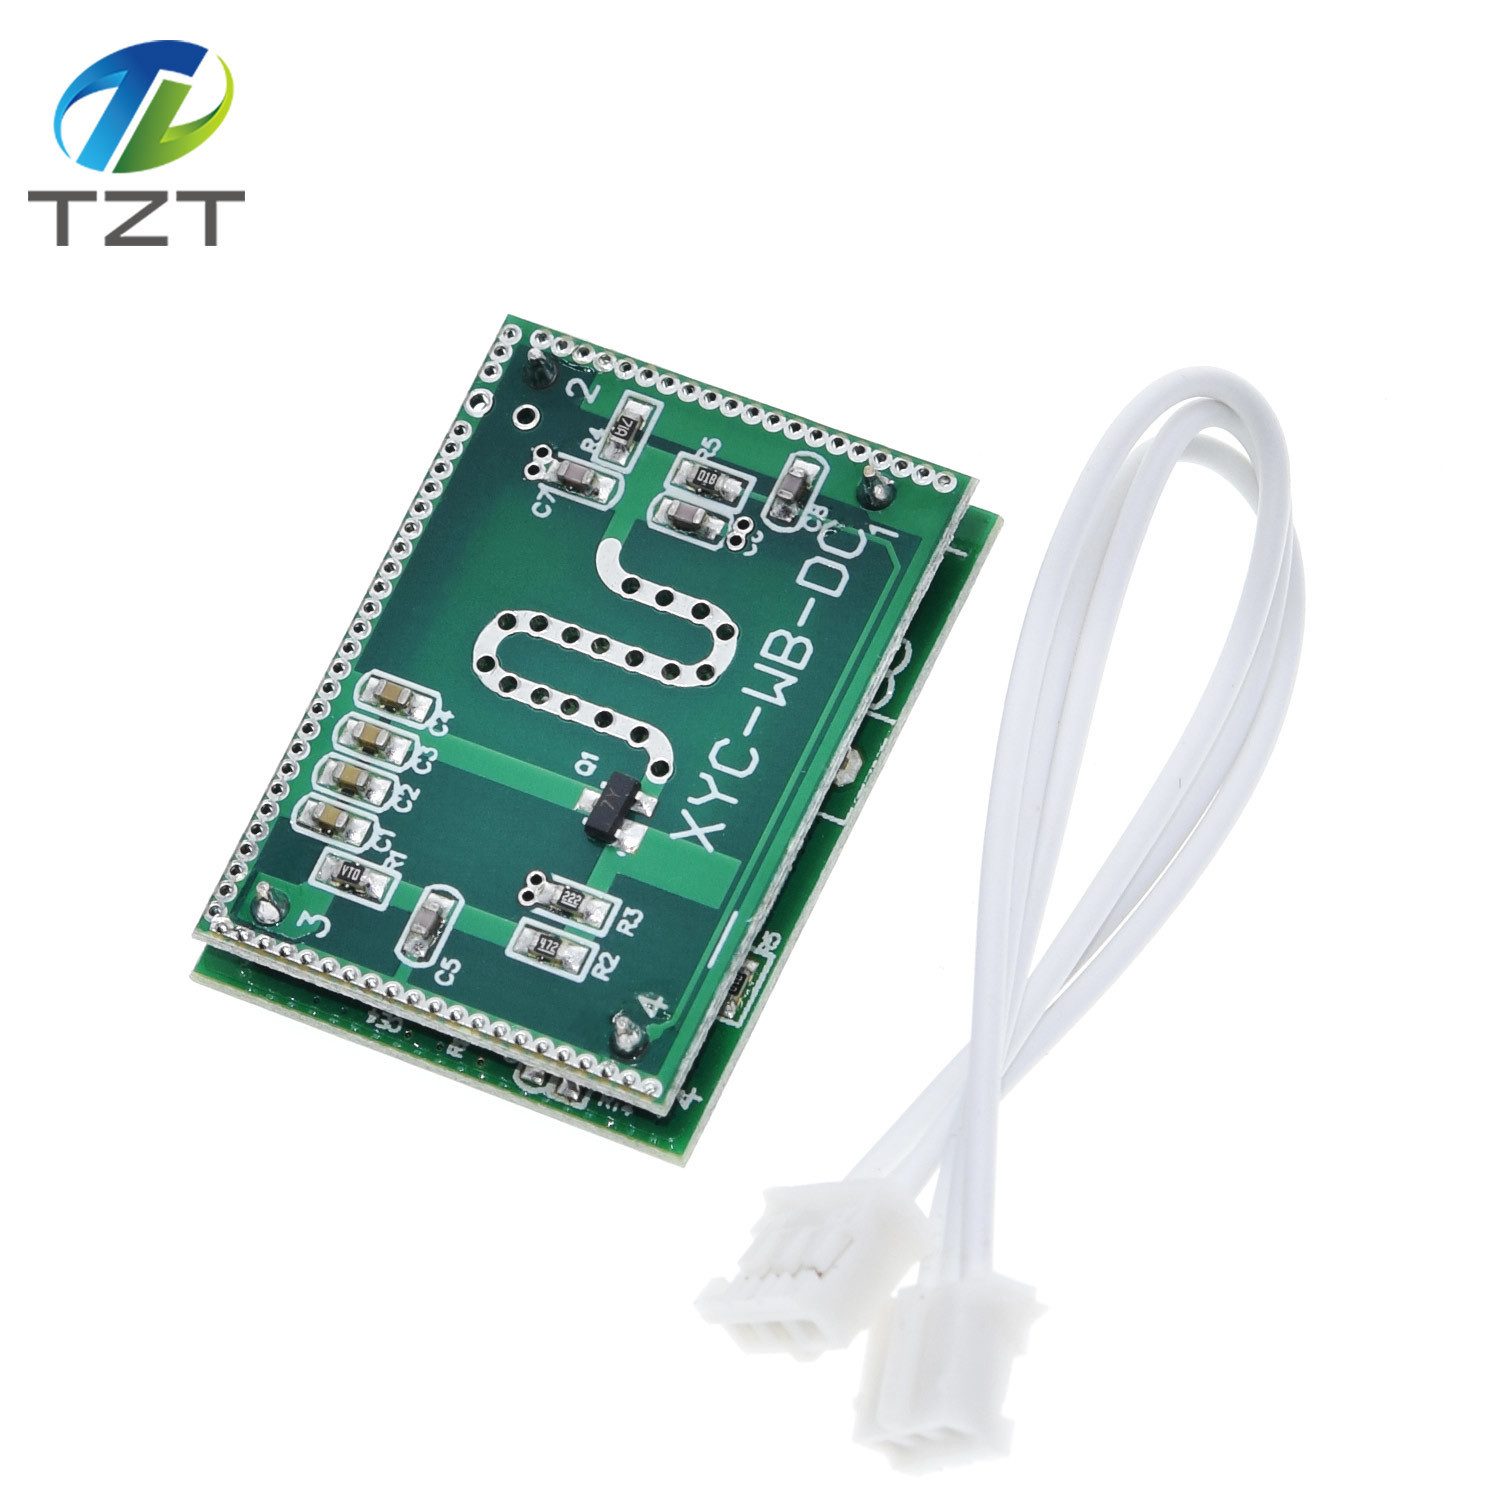 TZT  Strong Anti-jamming! 5.8GHZ Microwave Radar Sensor 6-9M Smart Trigger Switch Module 3.3-20V DC for Home Control